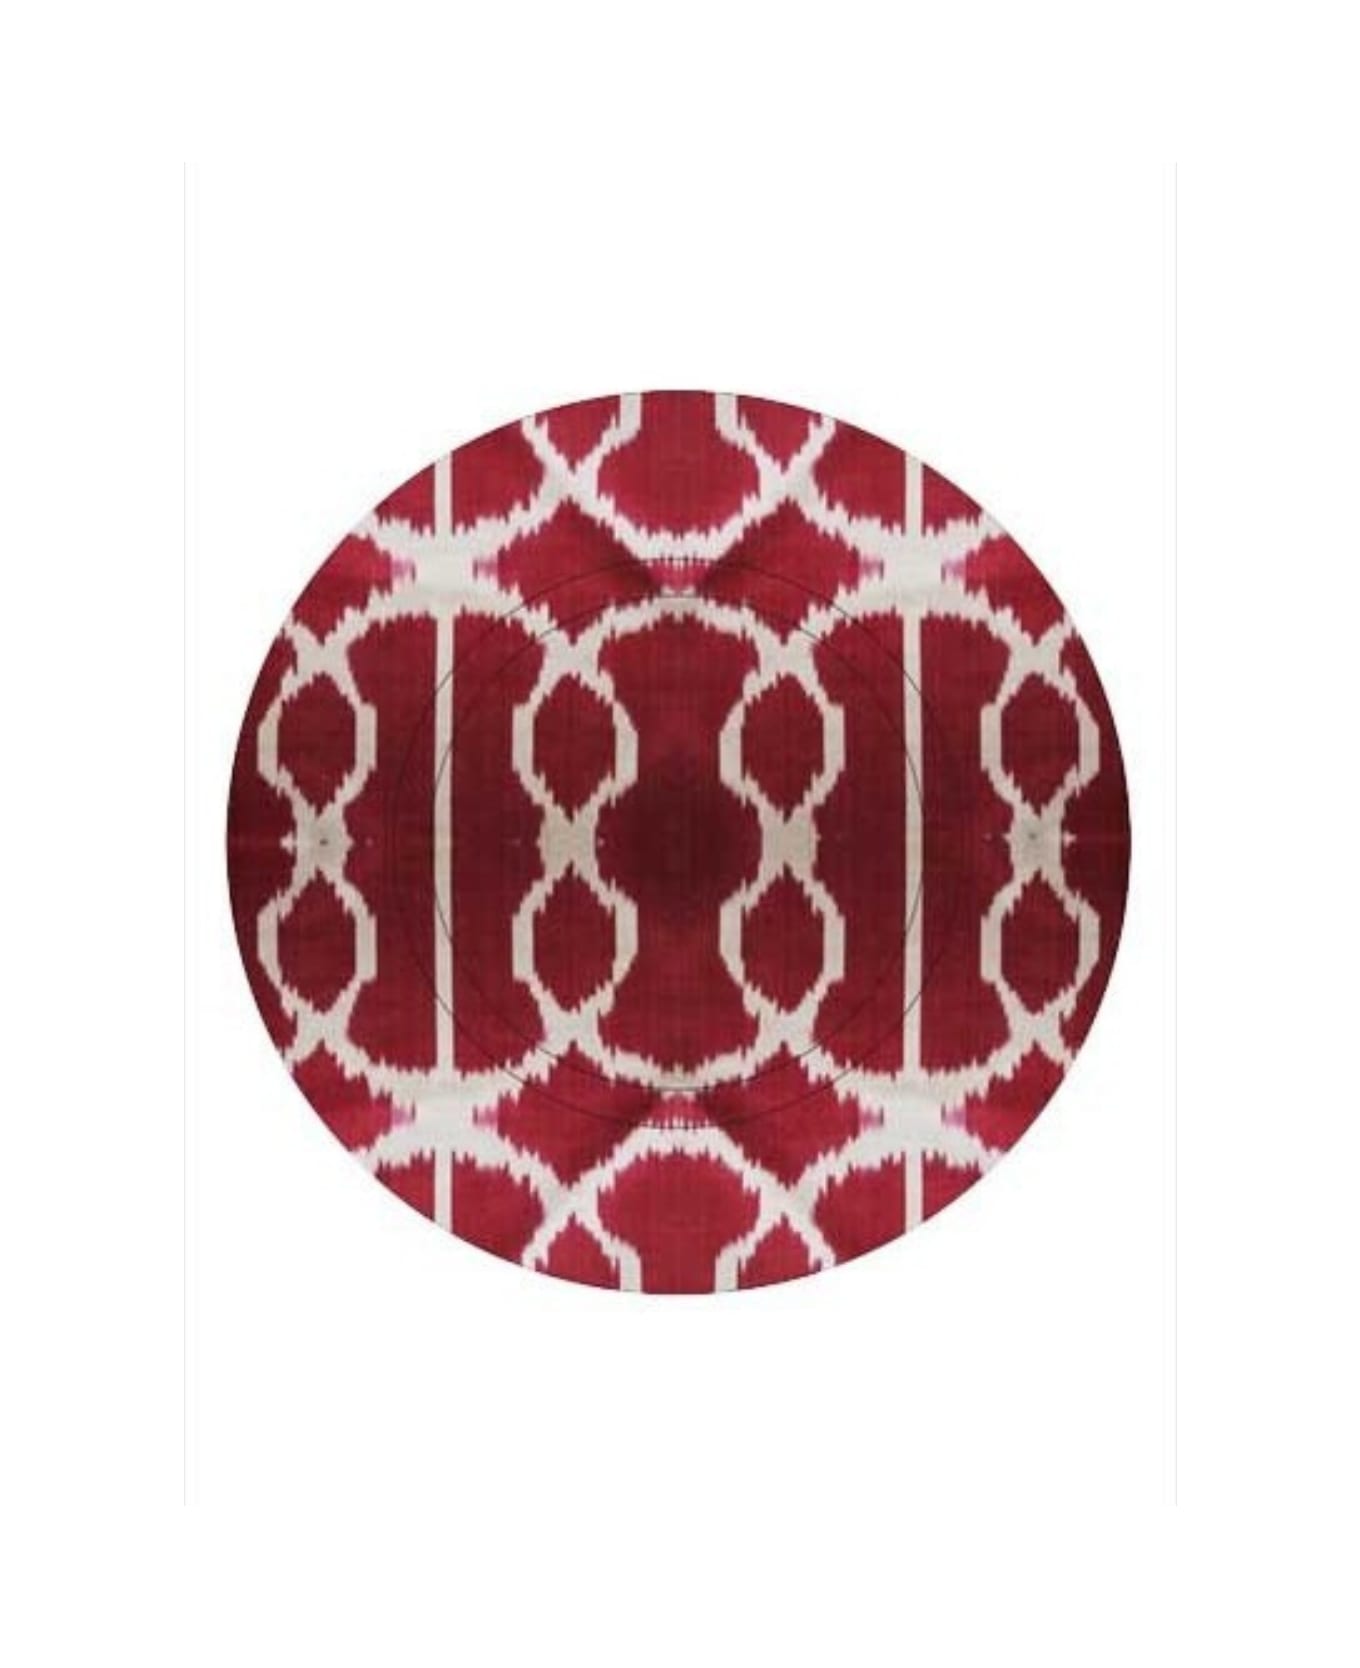 Les-Ottomans Red Glazed Ceramic Dinner Plate Les-ottomans Home - Red お皿＆ボウル